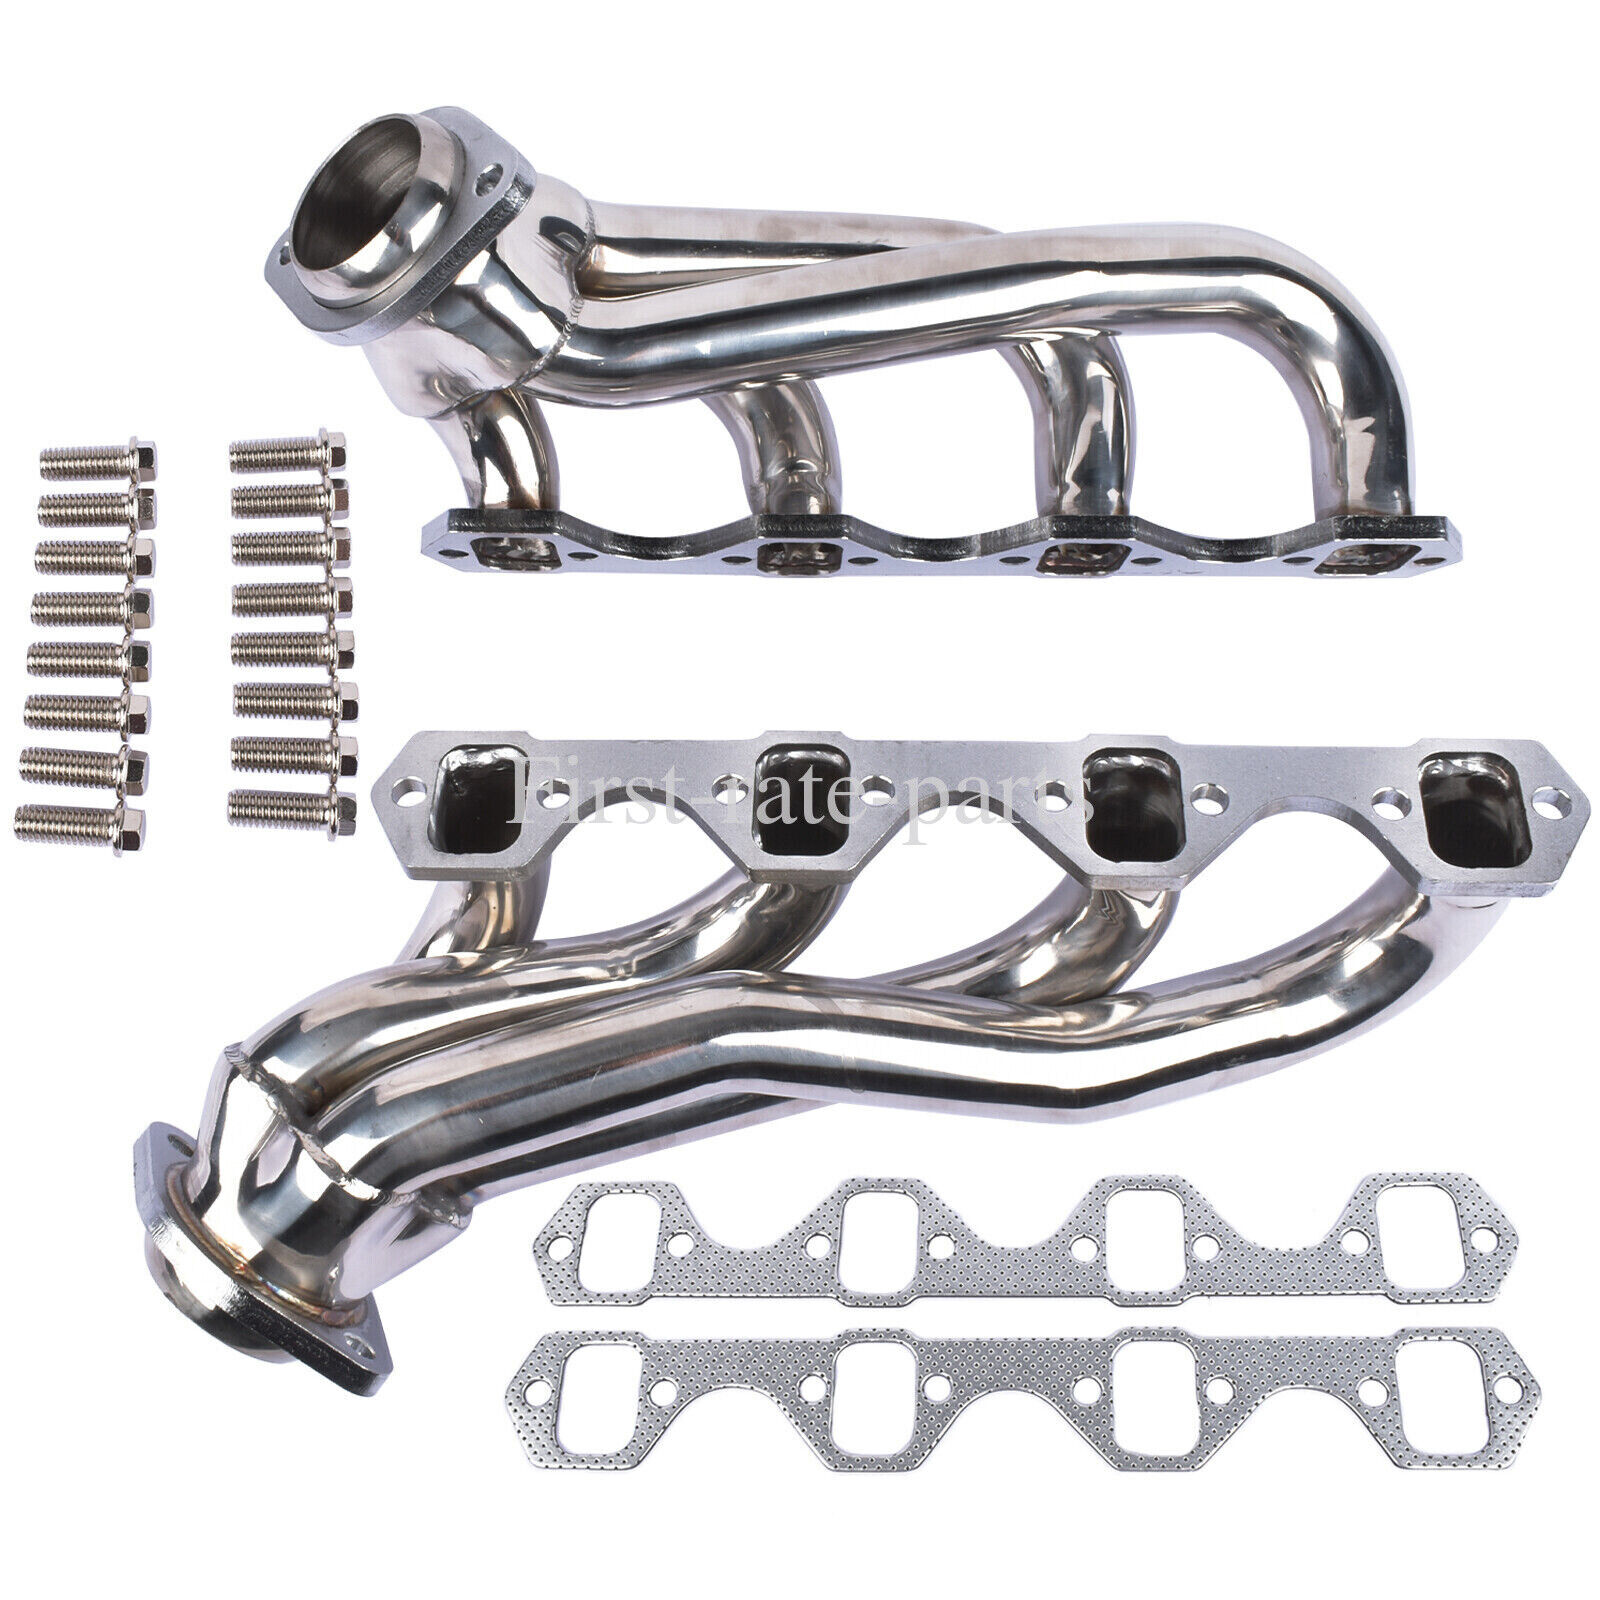 For Mustang 5.0 V8 GT/LX/SVT 1979-1993 Stainless Steel Exhaust Manifold Headers